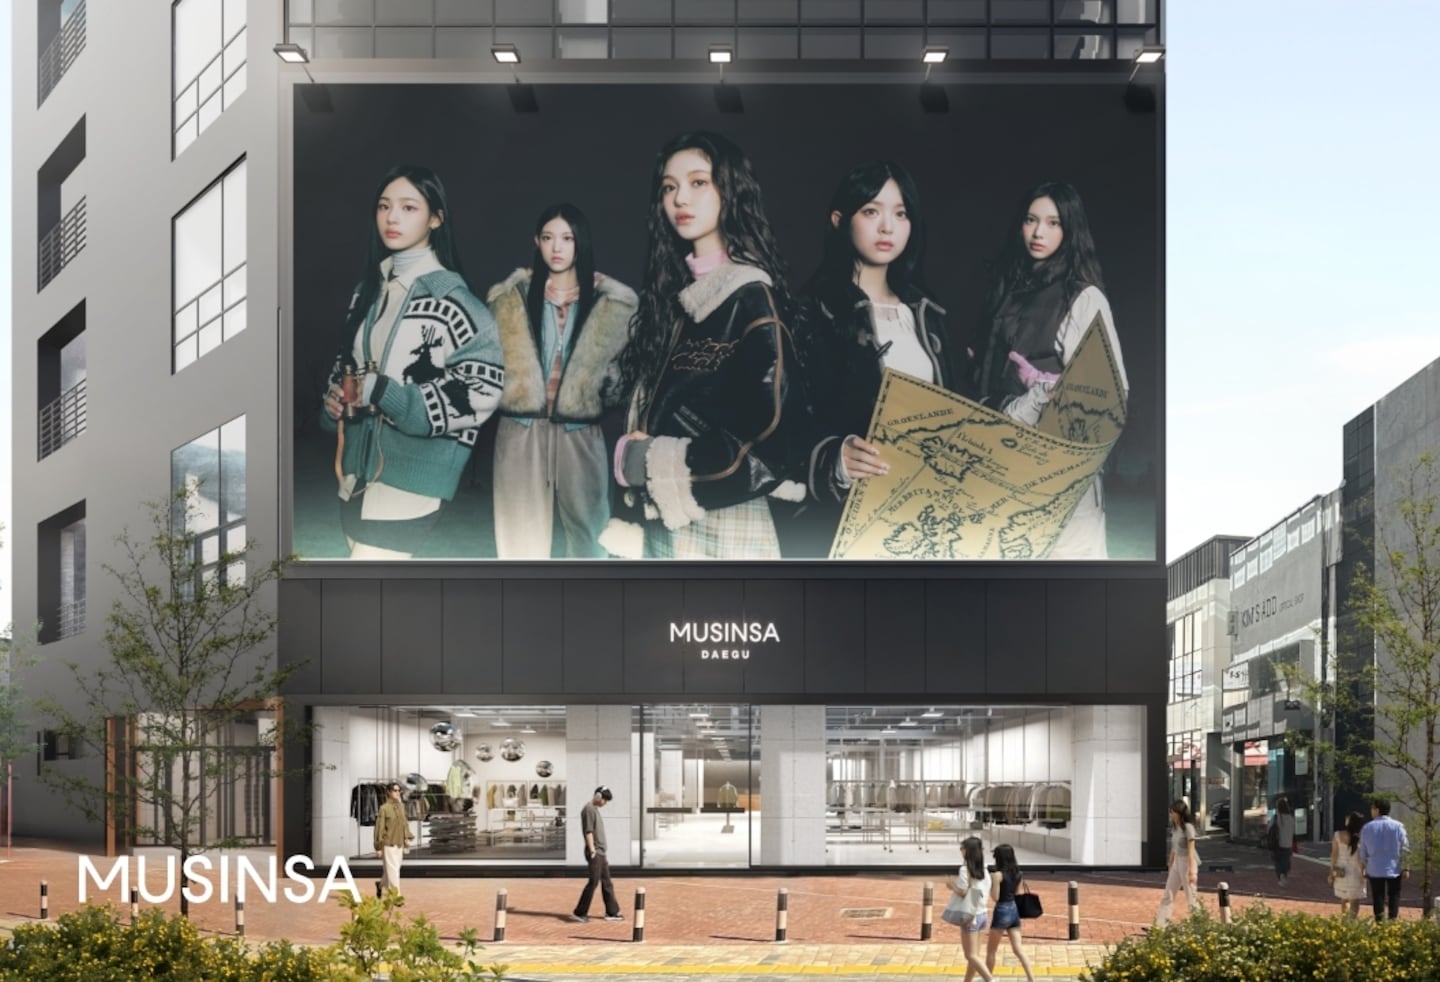 K-fashion e-commerce giant Musinsa opened a store in the city of Daegu in 2023, expanding its physical presence beyond Seoul in the South Korean market.